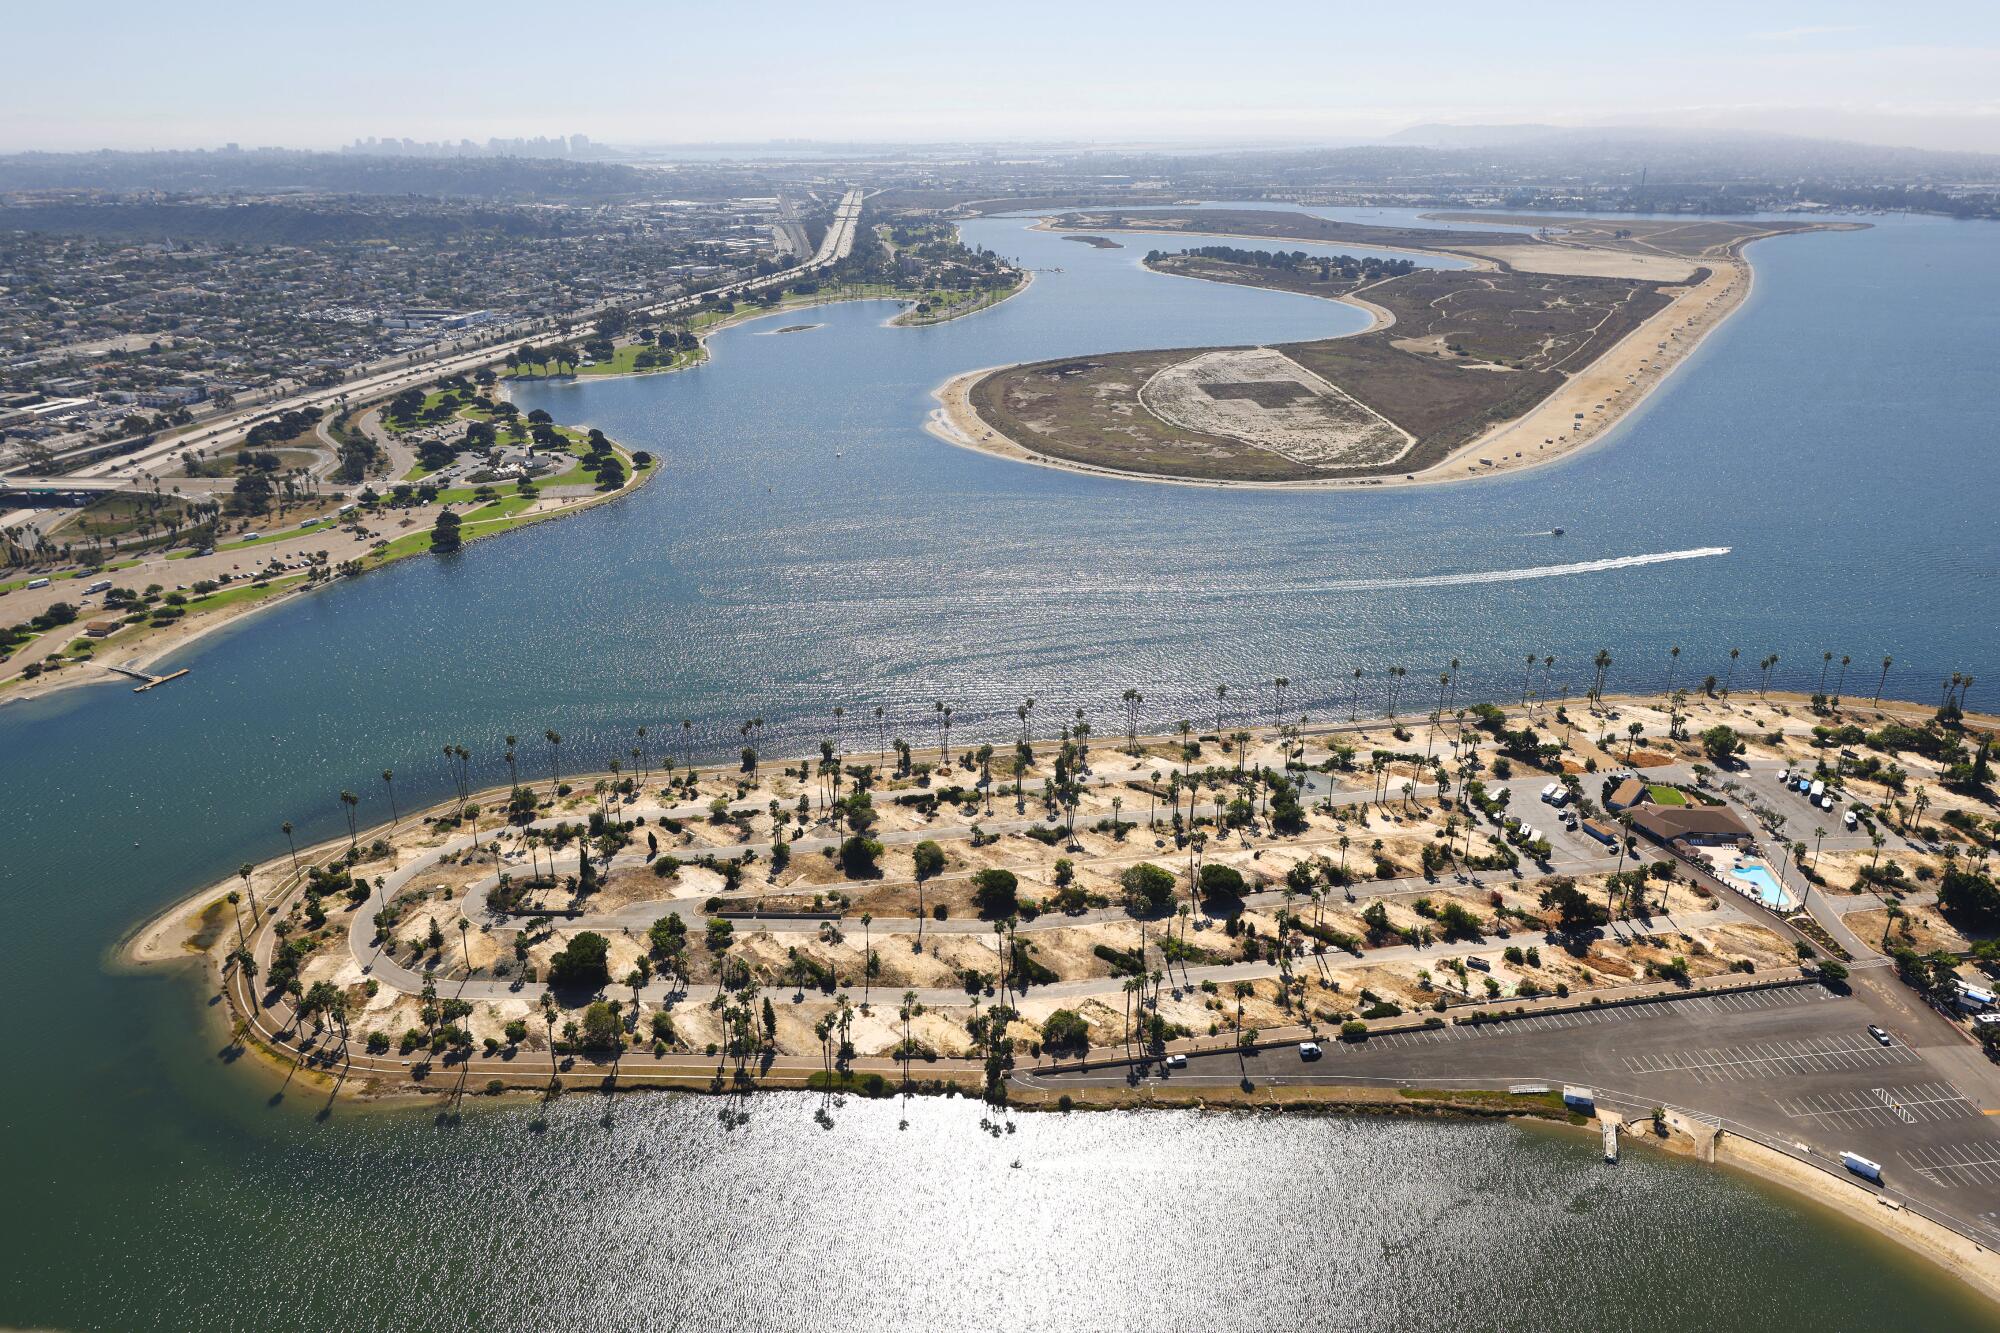 Mission Bay future takes shape: Planning commission OKs plan - The